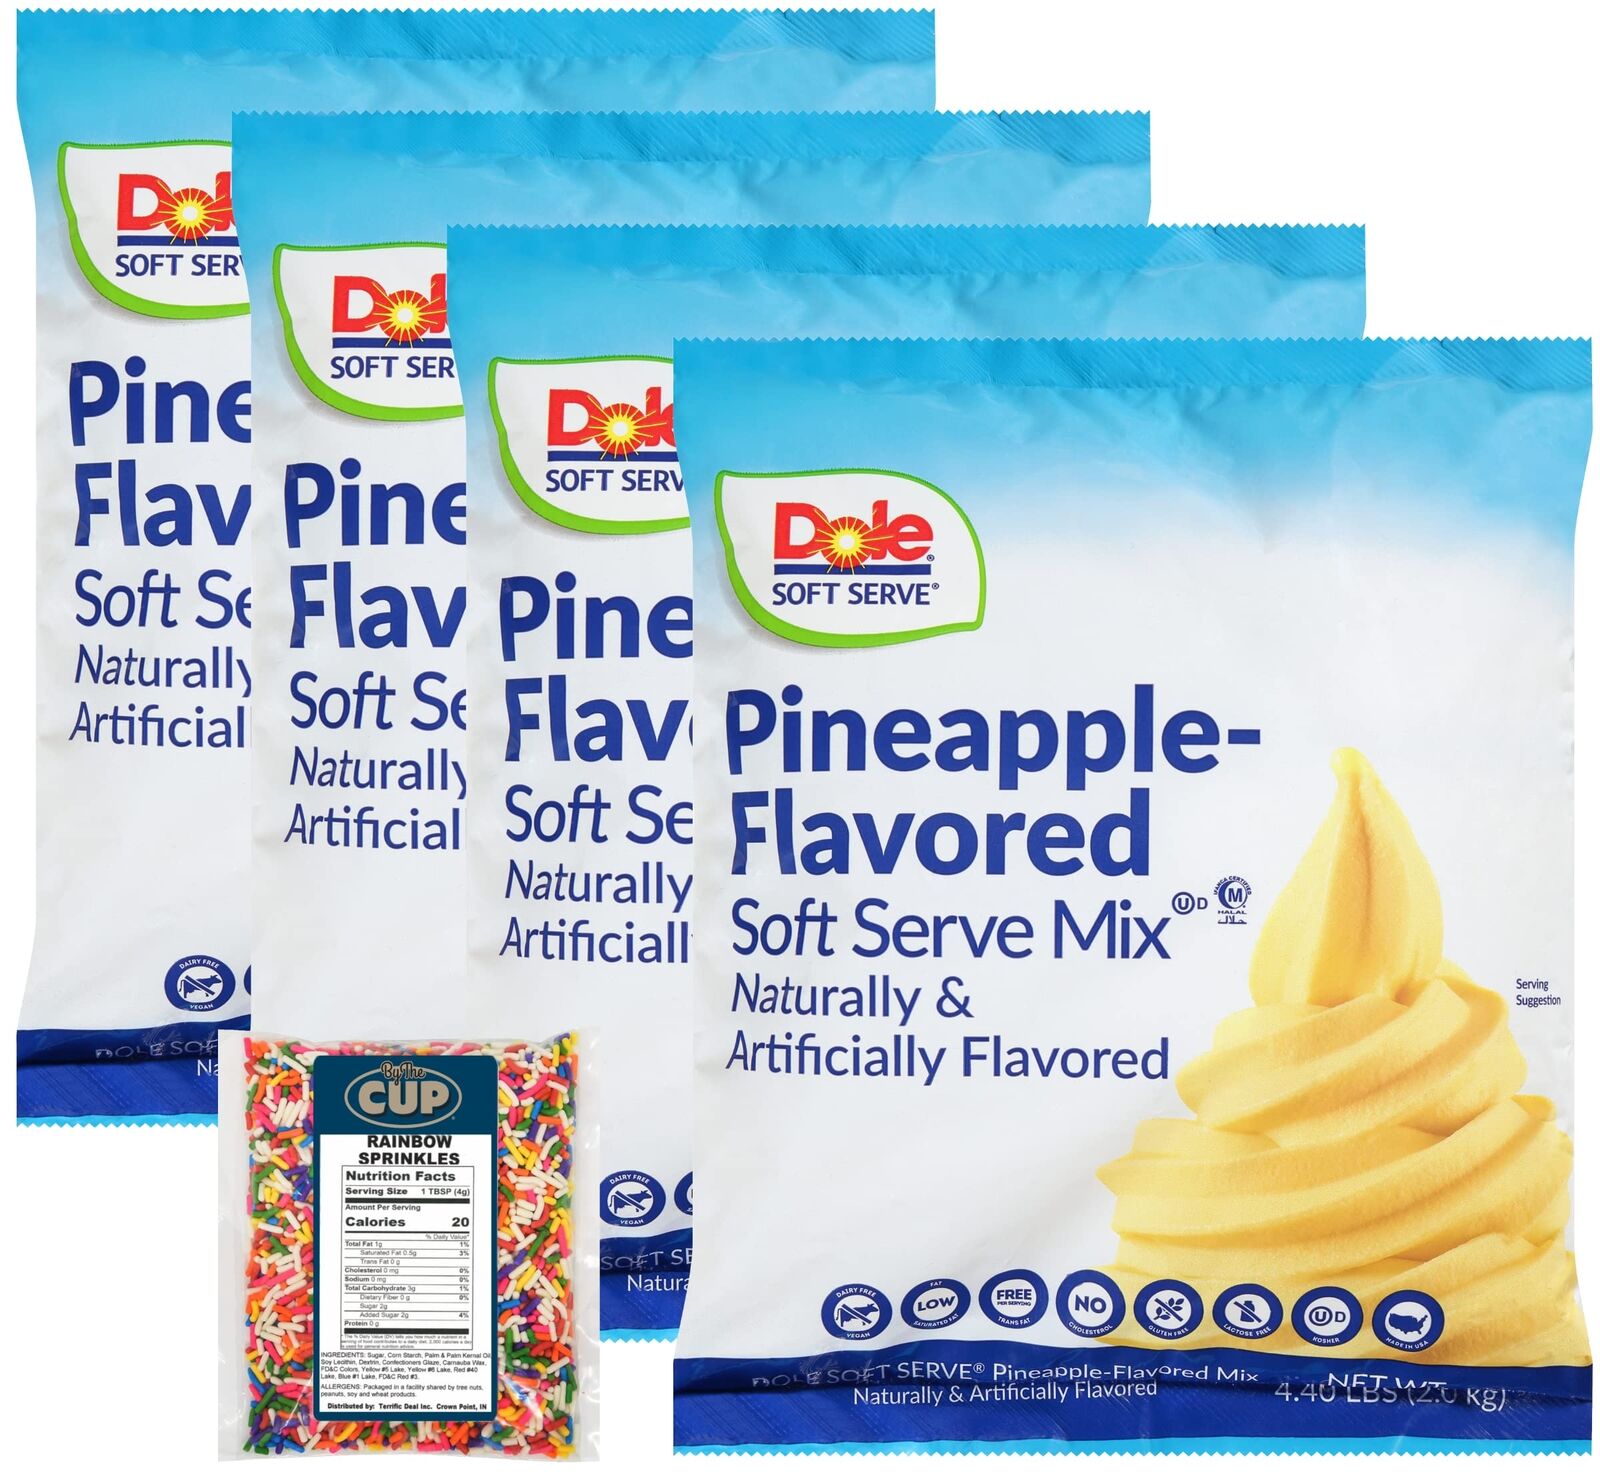 Pineapple Soft Serve Mix Lactose Free Vegan Gluten Free 4.4 lb Pack of 4 with...